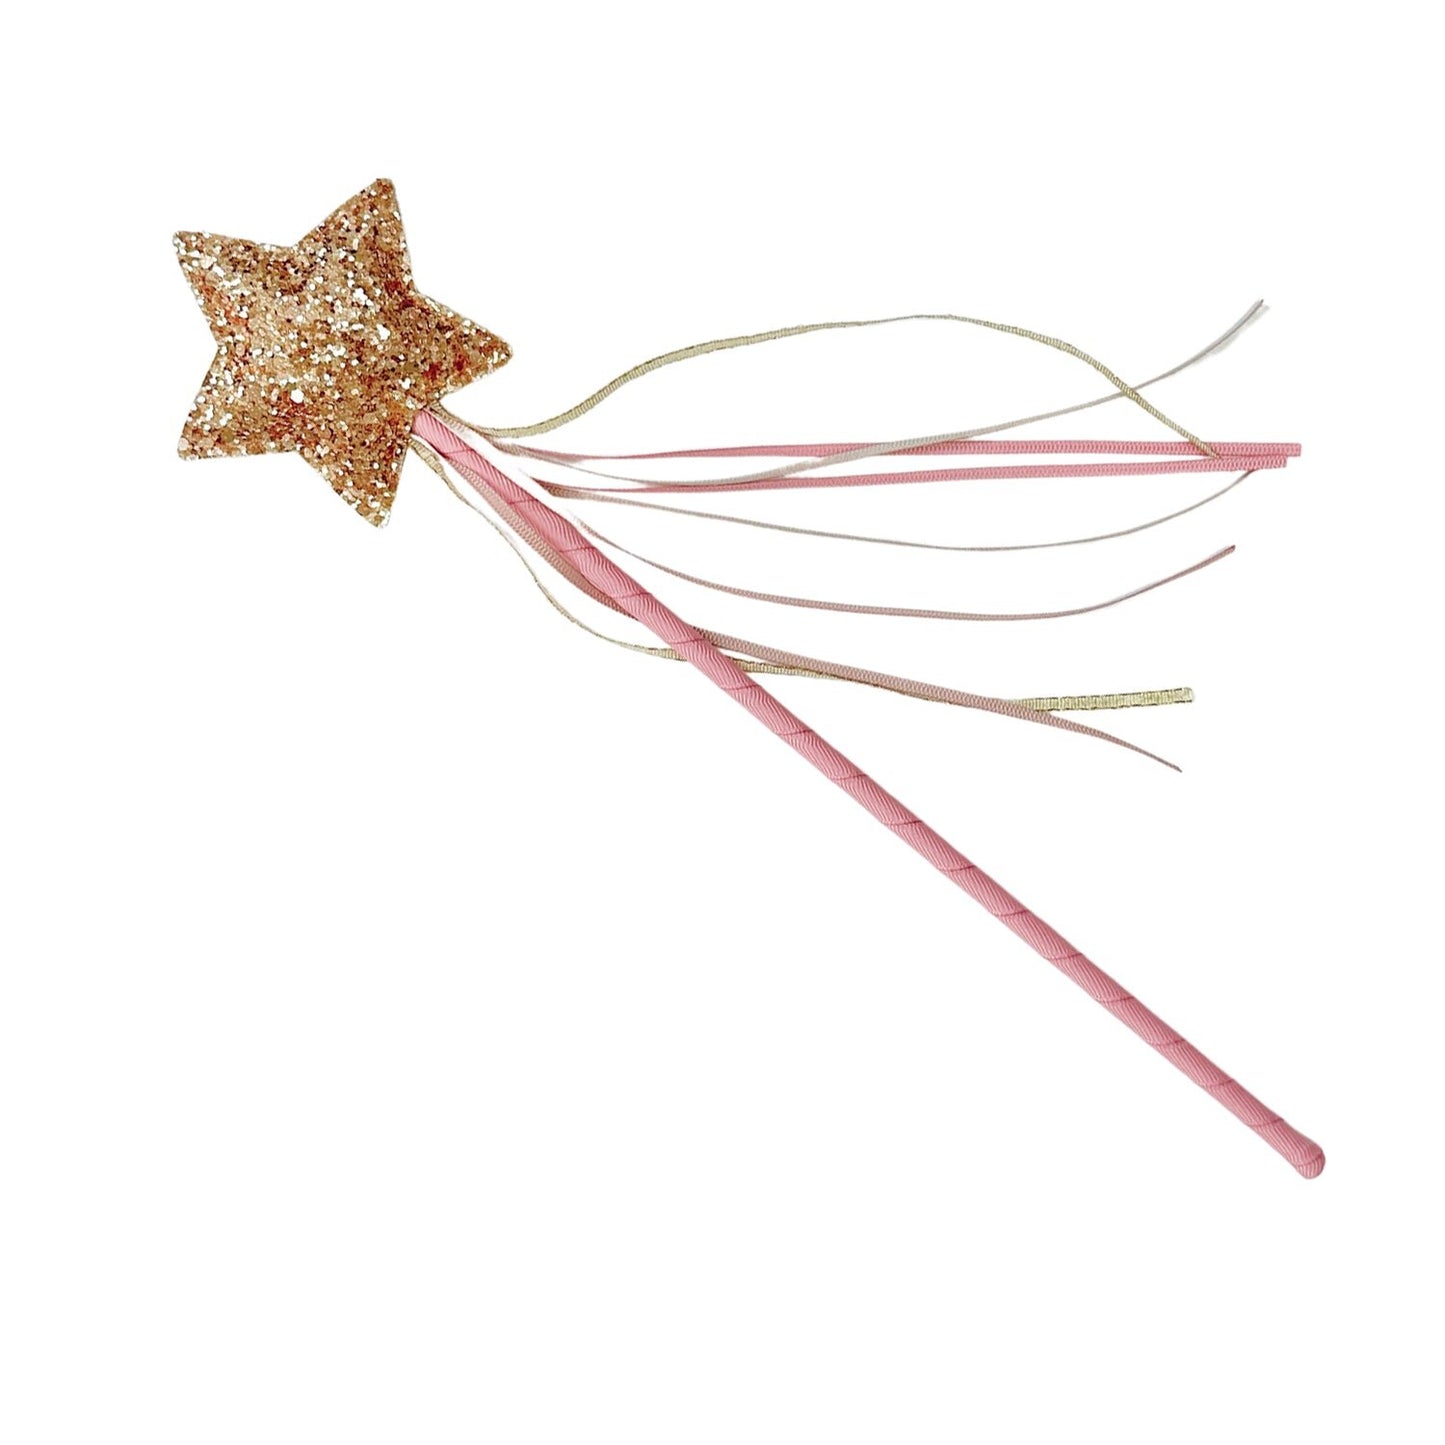 Glitter Star Wand by Rockahula in Pink